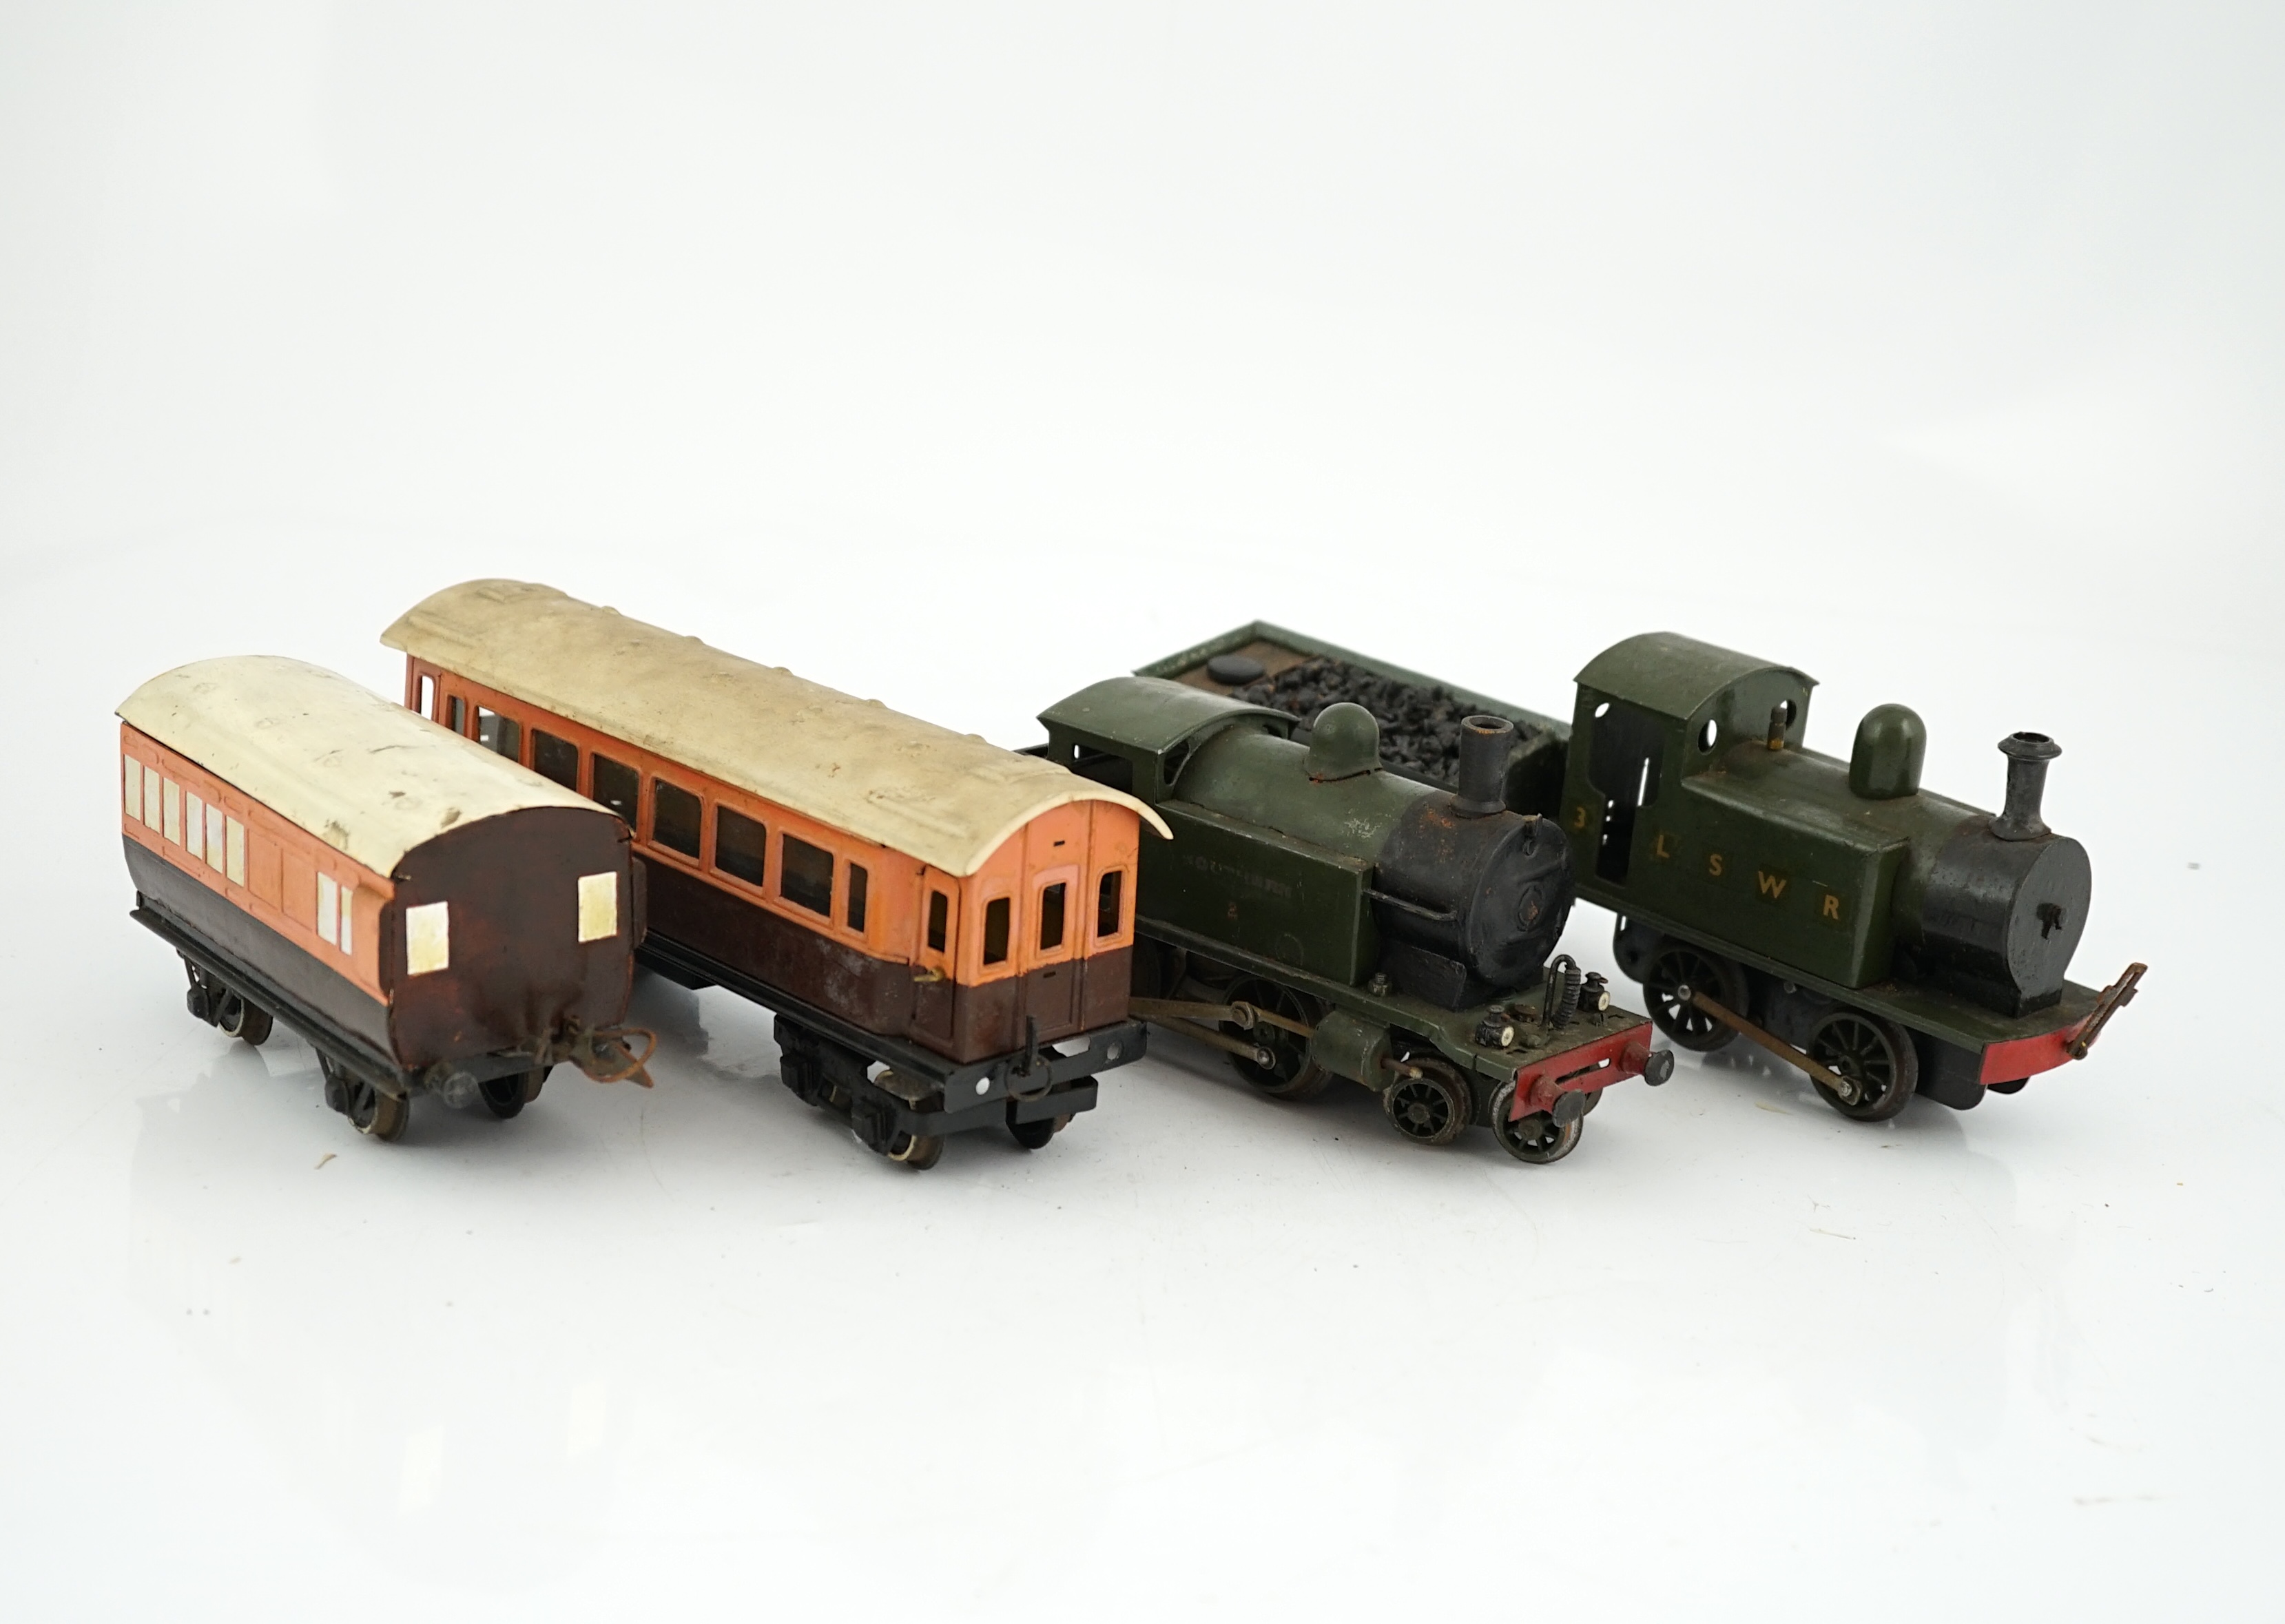 Fifteen tinplate 0 gauge railway items, including three clockwork locomotives; an LSWR 0-4-2 tender loco, an LSWR 0-4-0T and a SR 4-4-0T, all built using some commercial parts with some elements scratch built